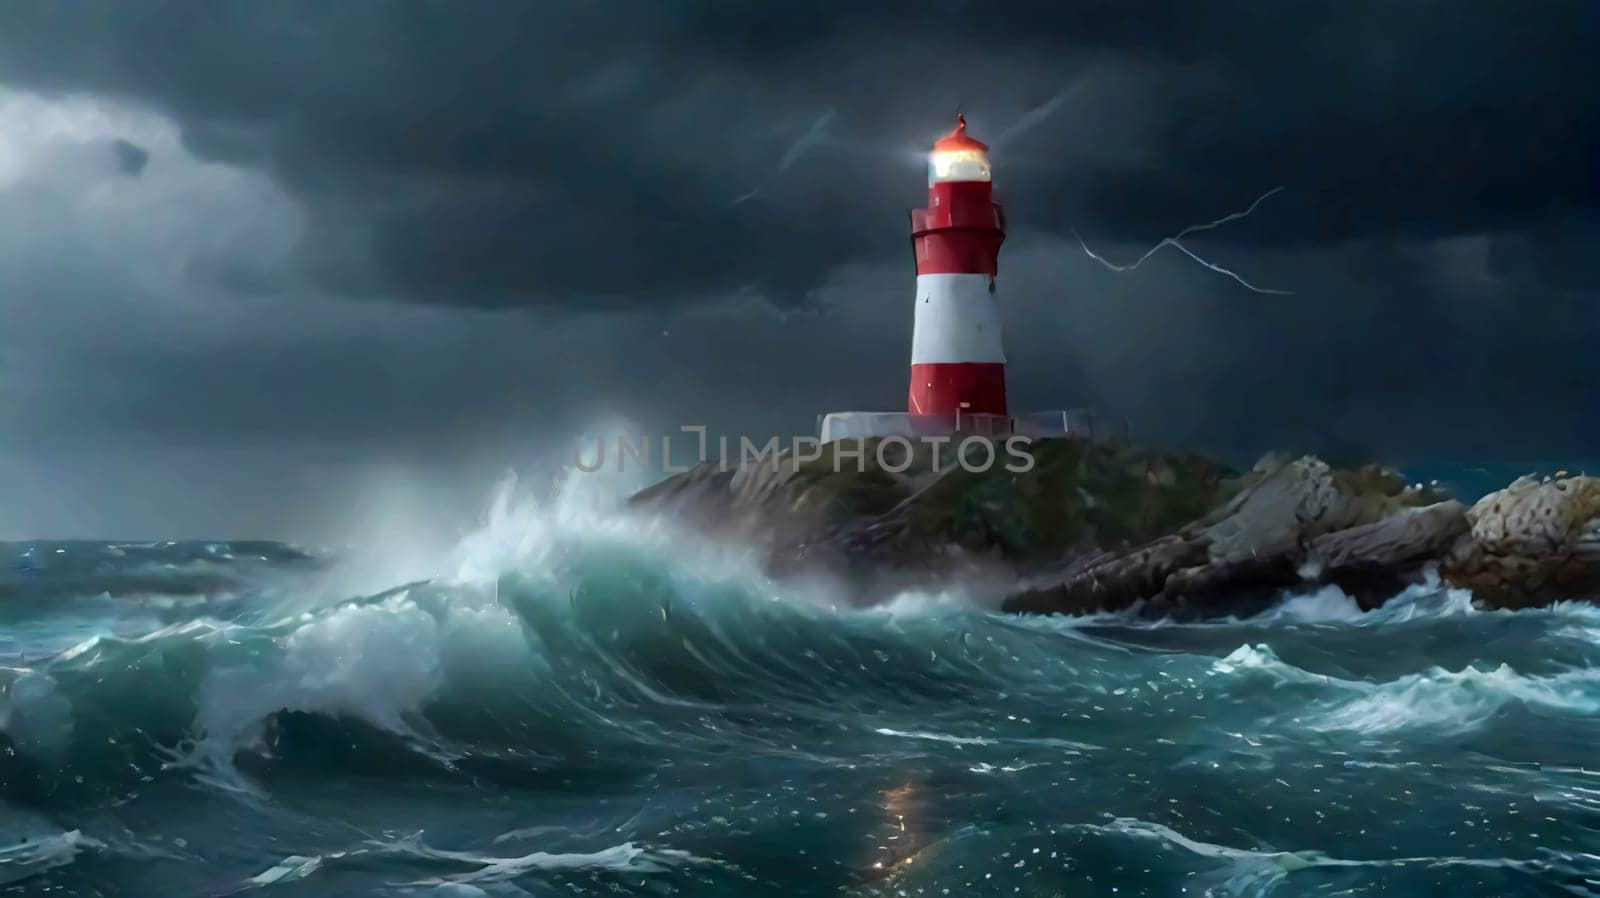 Lighthouse on the rocks by the raging waves. Lighthouse on sea rock. Sea rock lighthouse. Coastal lighthouse landscape by antoksena